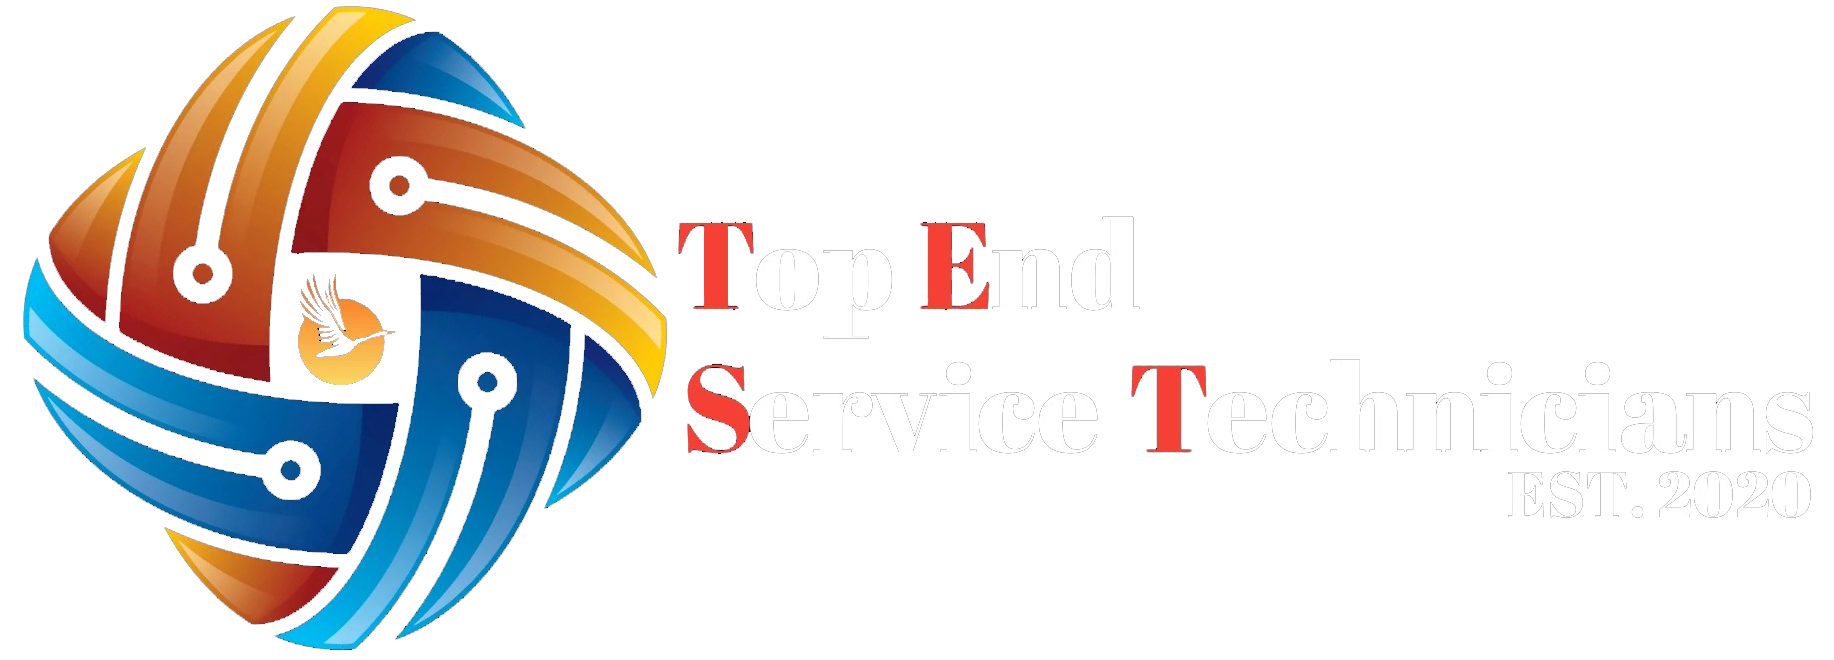 Top End Service Technicians: Electrical & Security Systems in Darwin